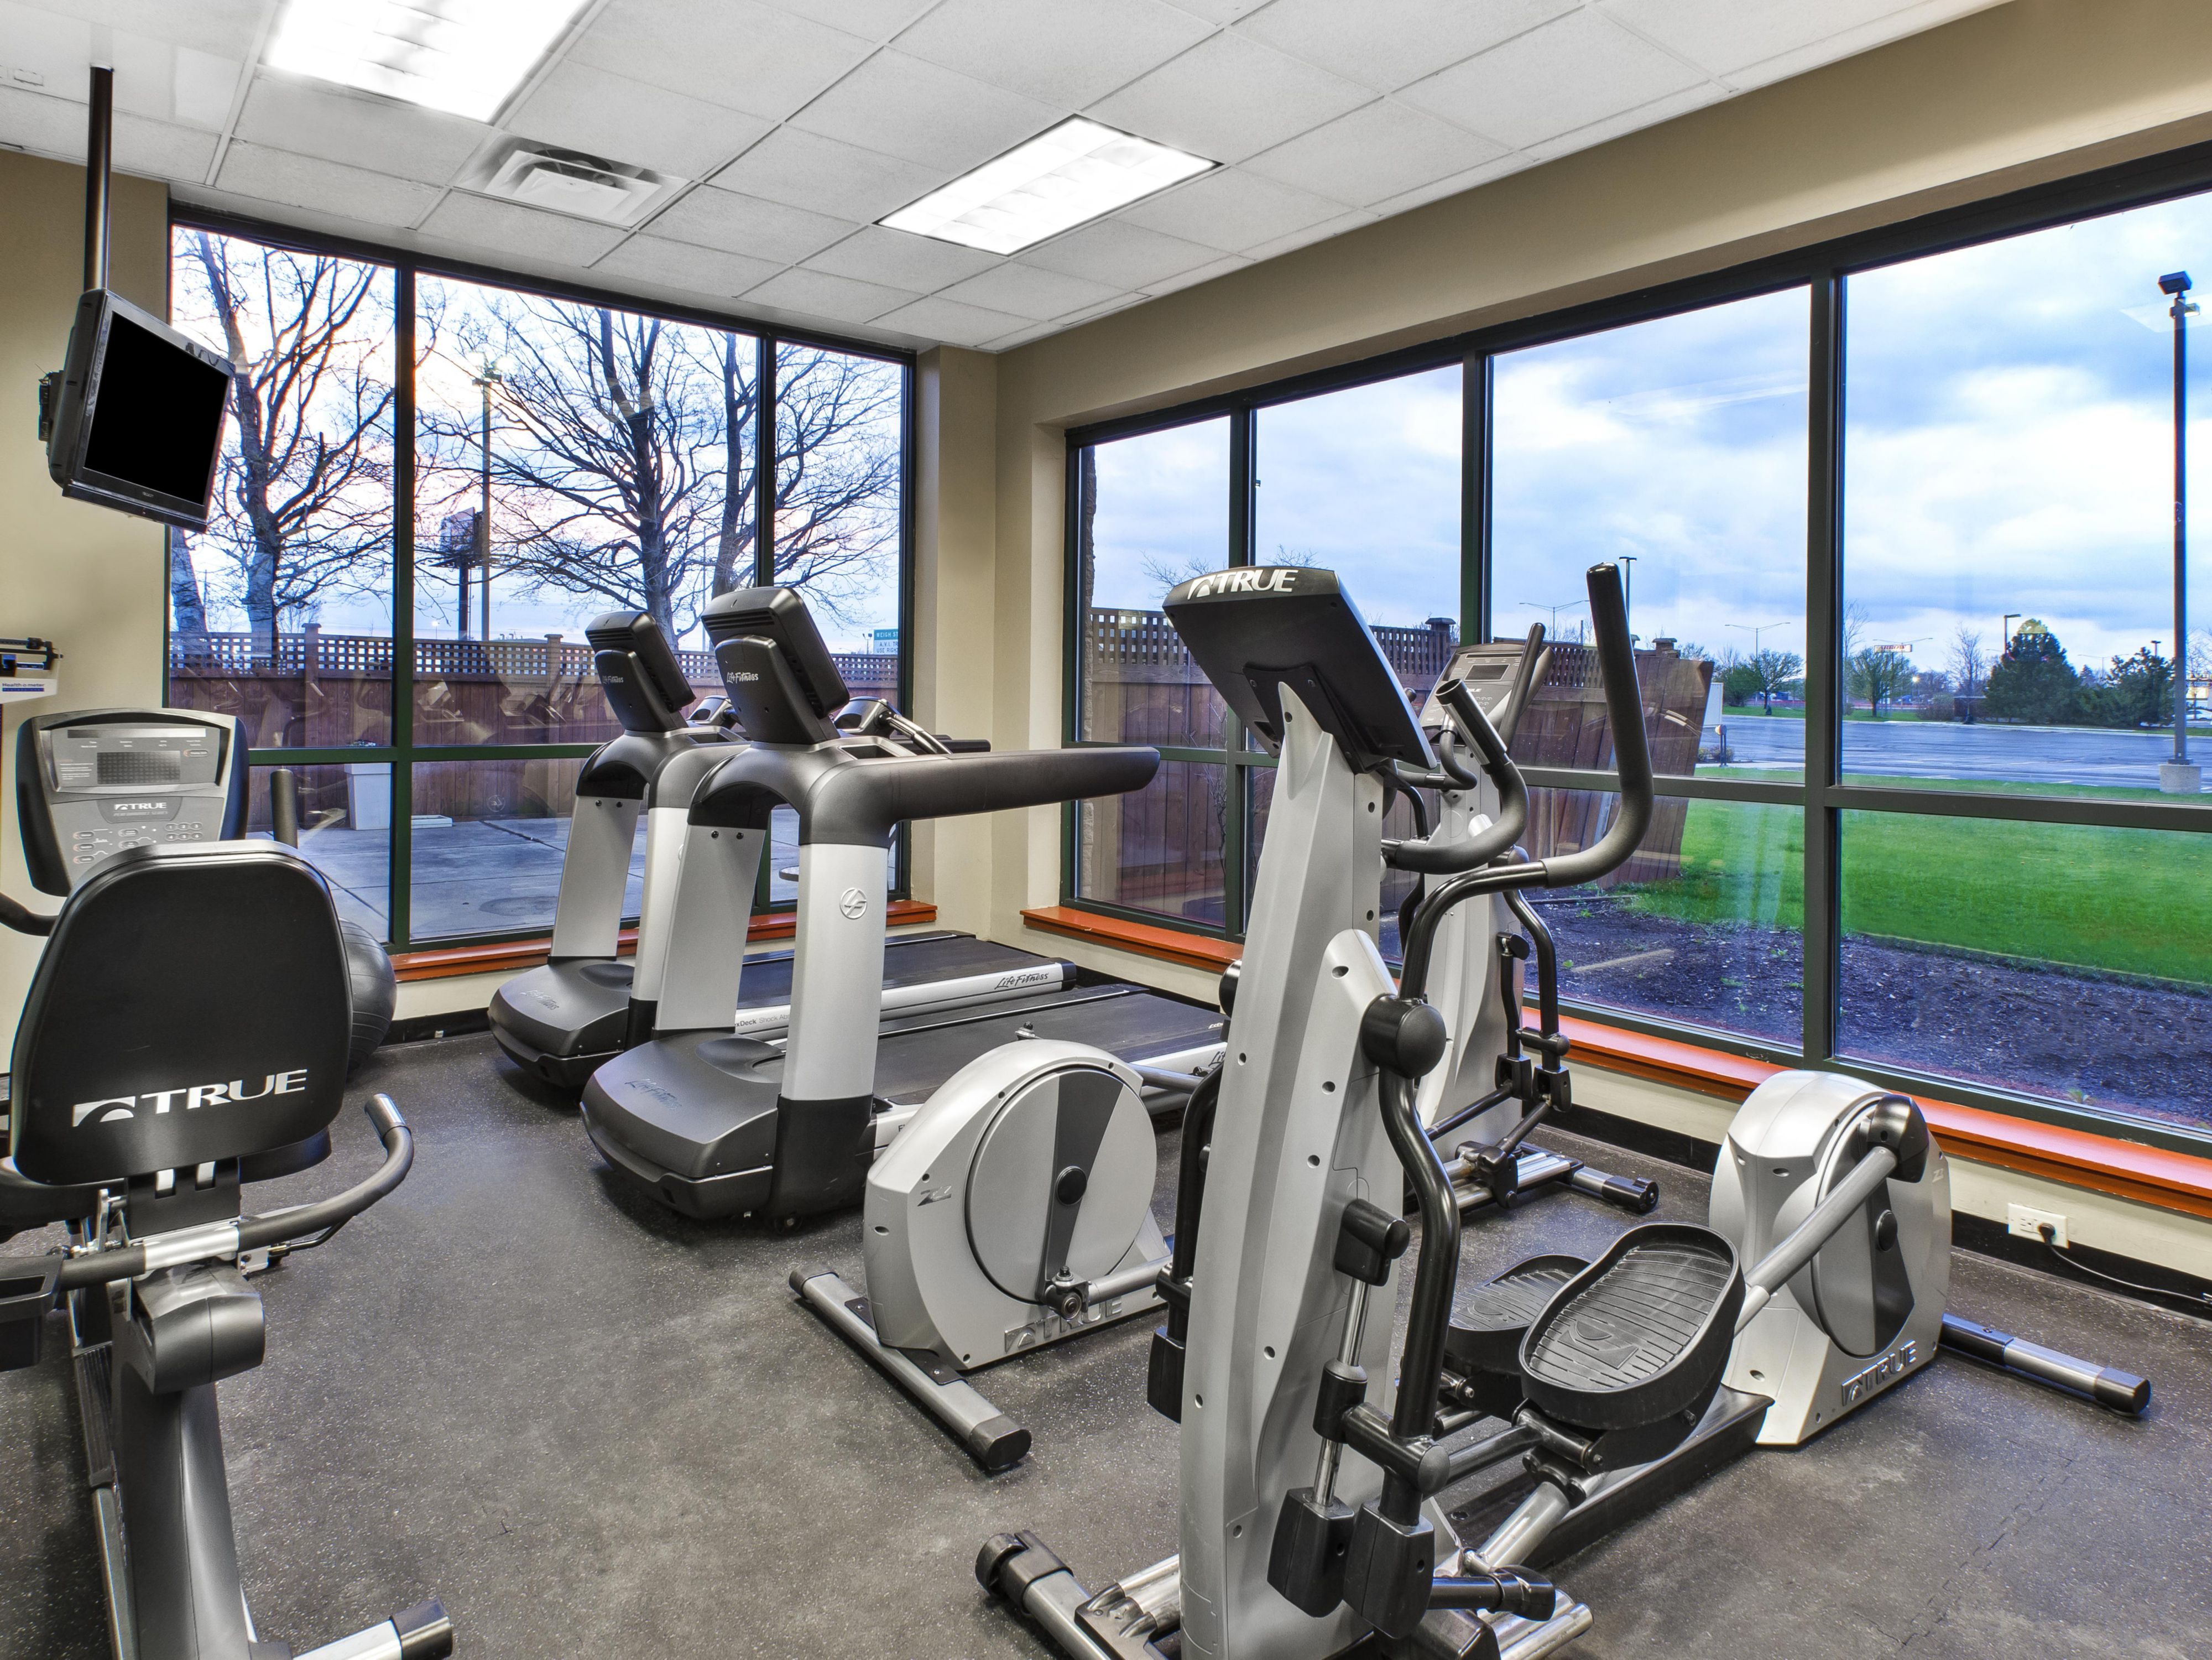 Just because you are traveling does not mean your fitness routine has to suffer. Take advantage of our Fitness Center open 24 hours.